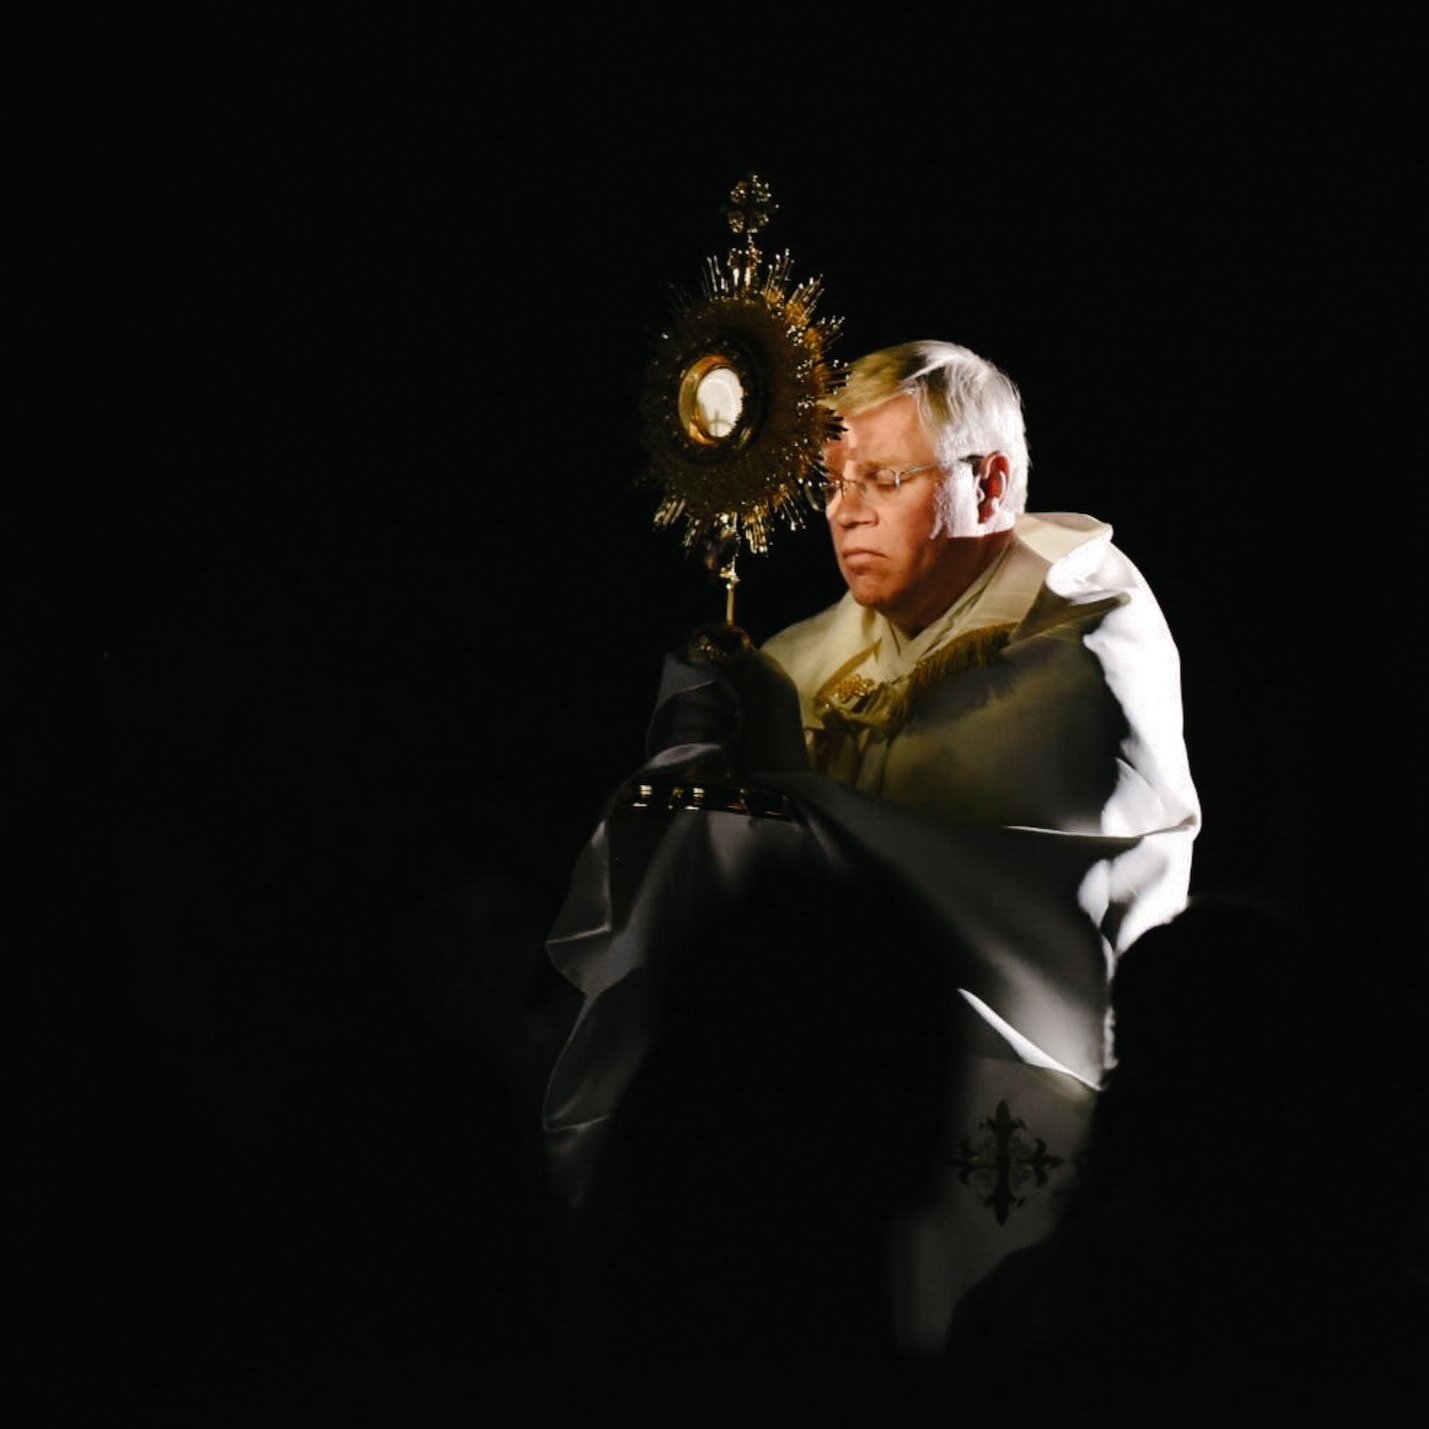 Priest carrying Monstrance